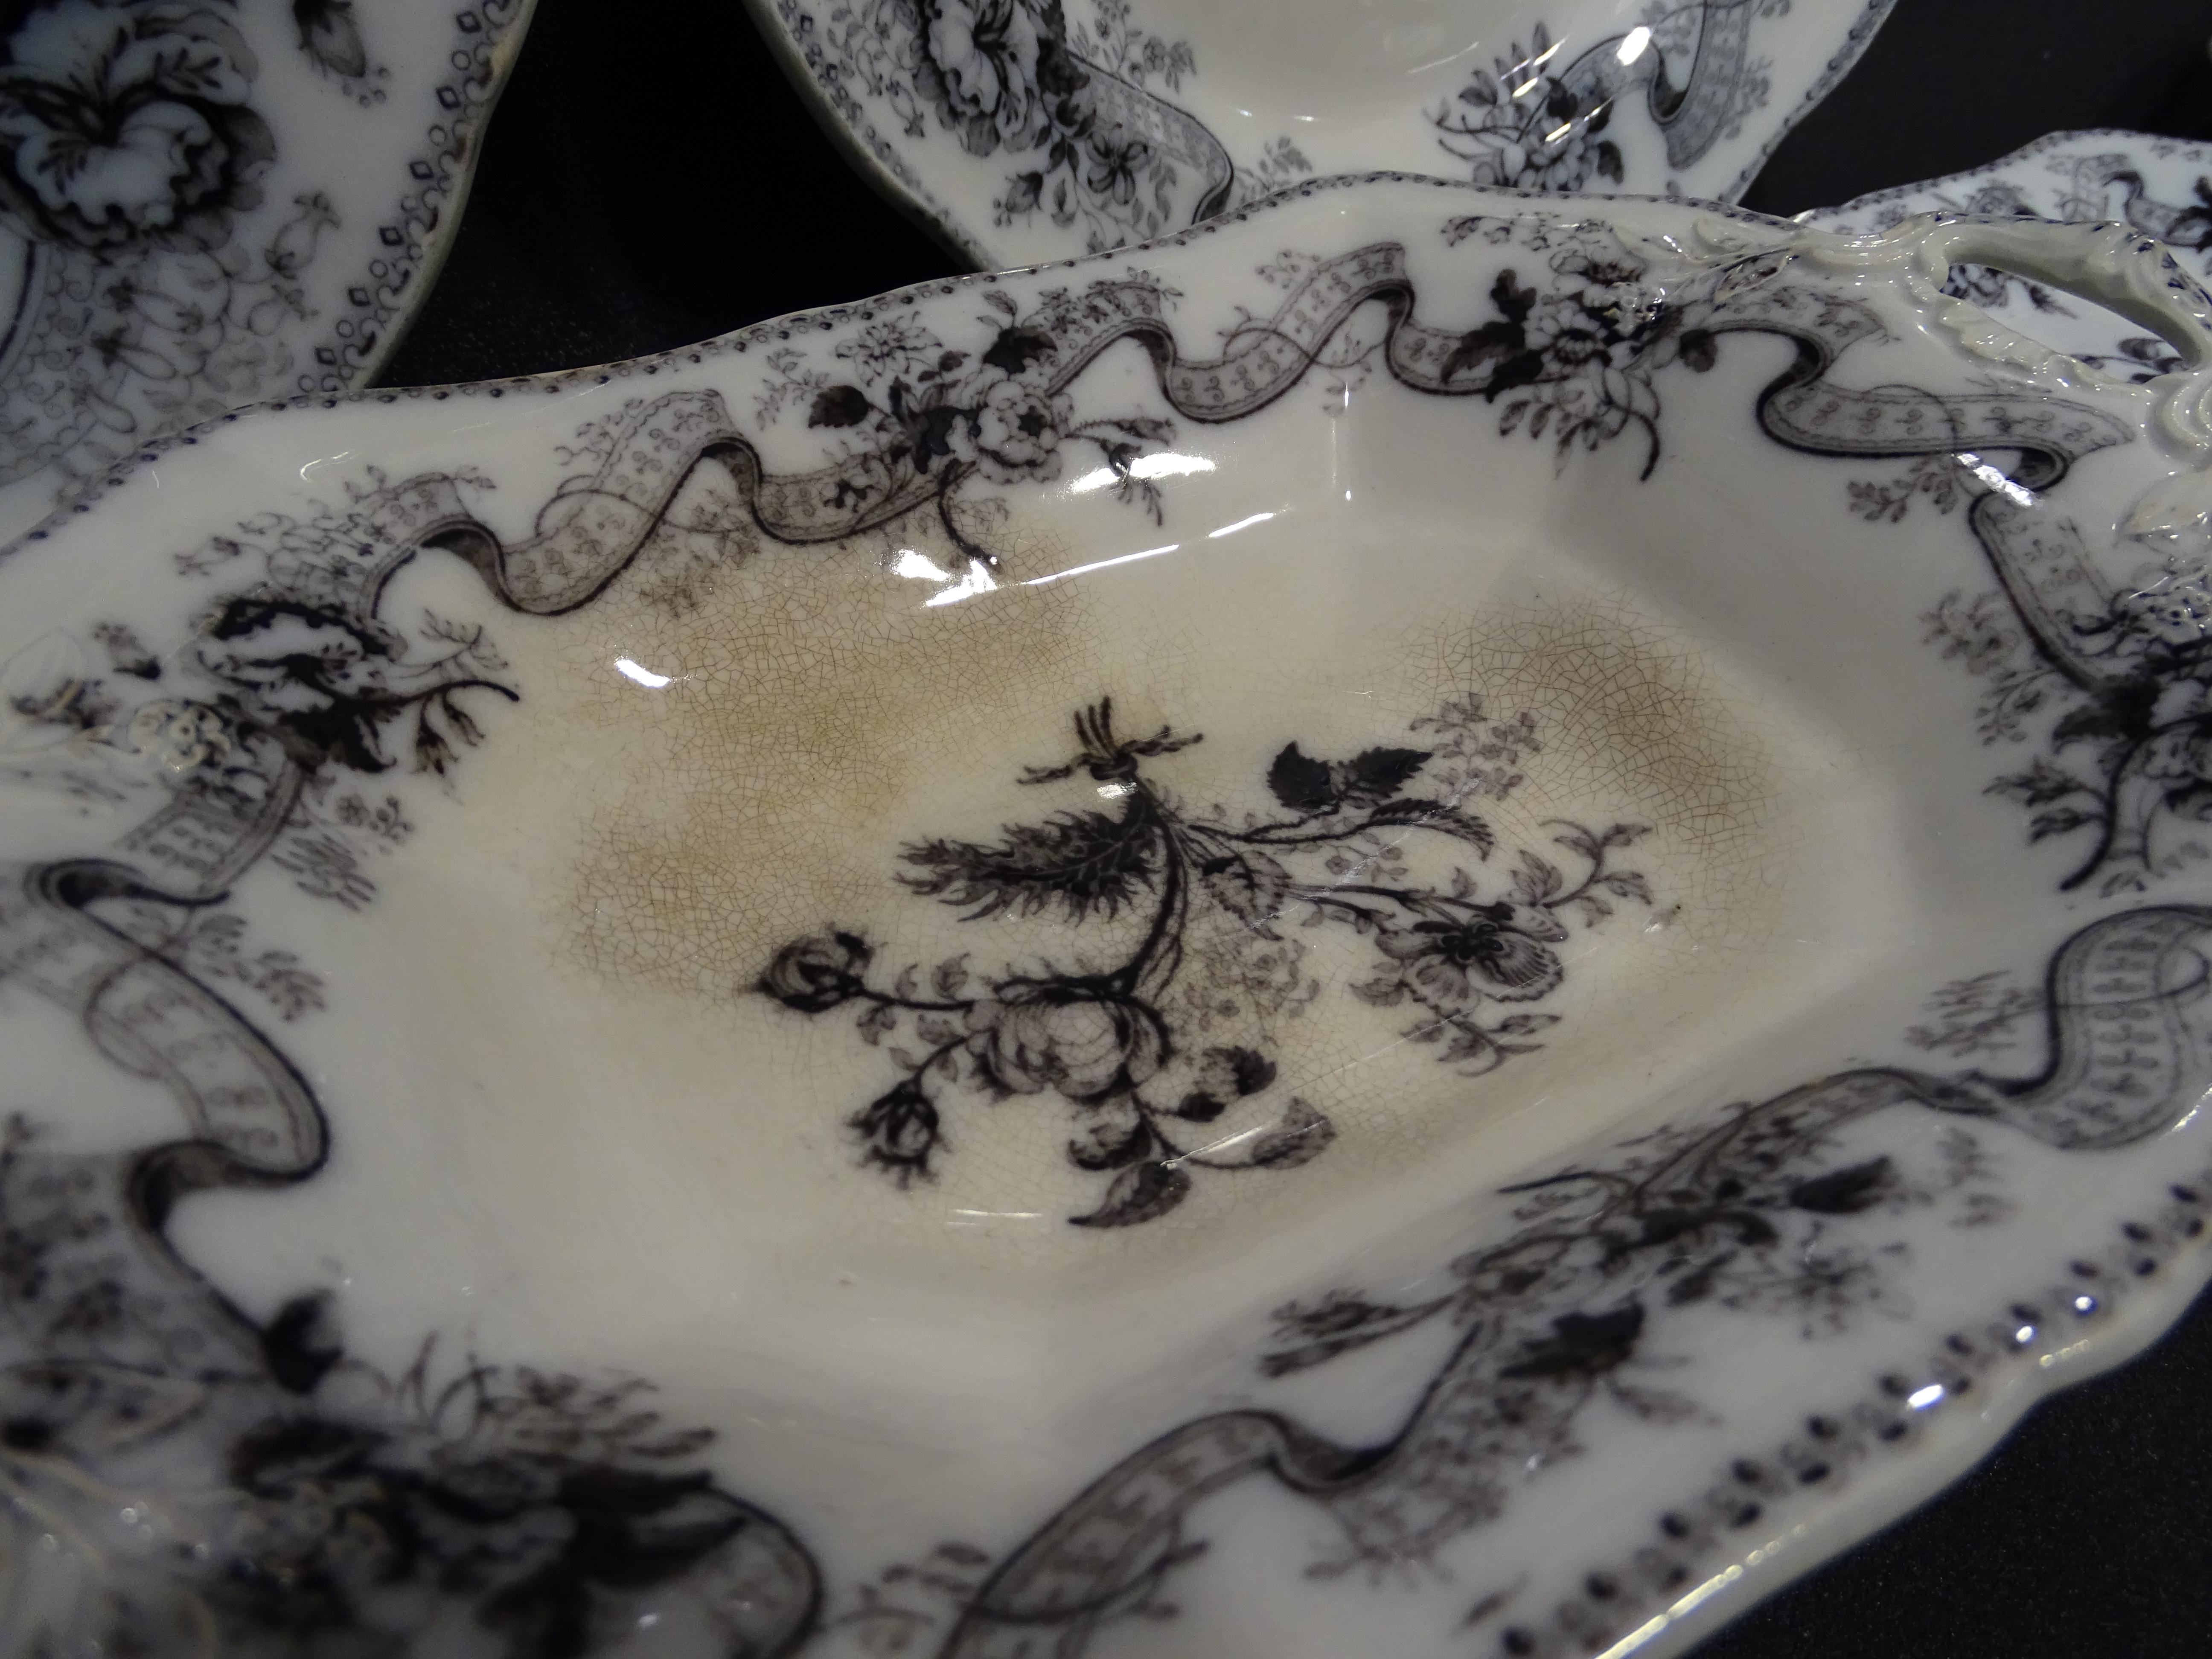 Amazing and refined tableware, Wedgwood, England, 19 th century, manufacture Josiah Wedgwood ( 1795-1815, 1878until now)
The tableware is handpainted with flowers ( Rose) and bows in an exquisite palette of grays , blacks and whites.
His name is 